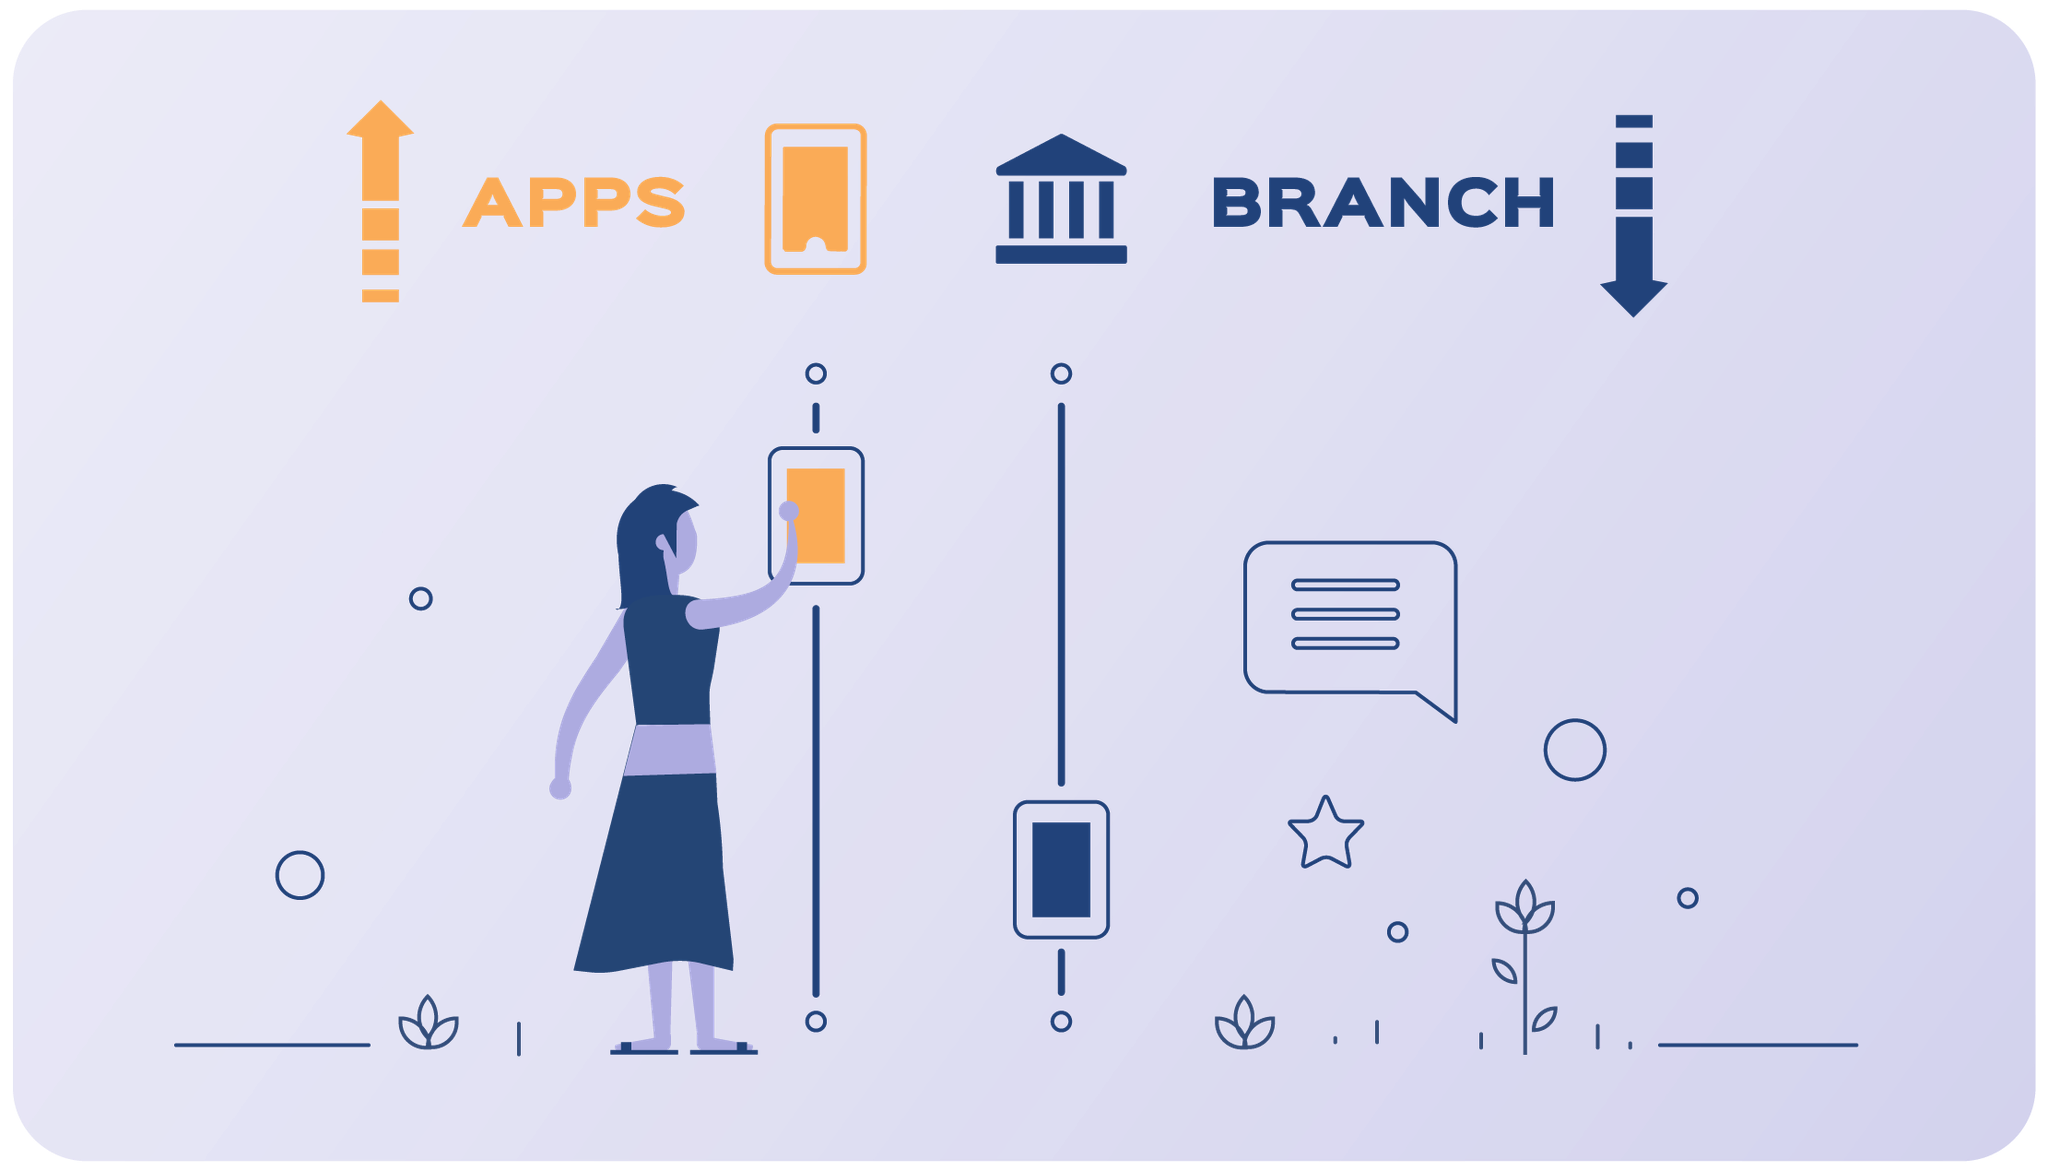 Over 65s switch branches for banking apps